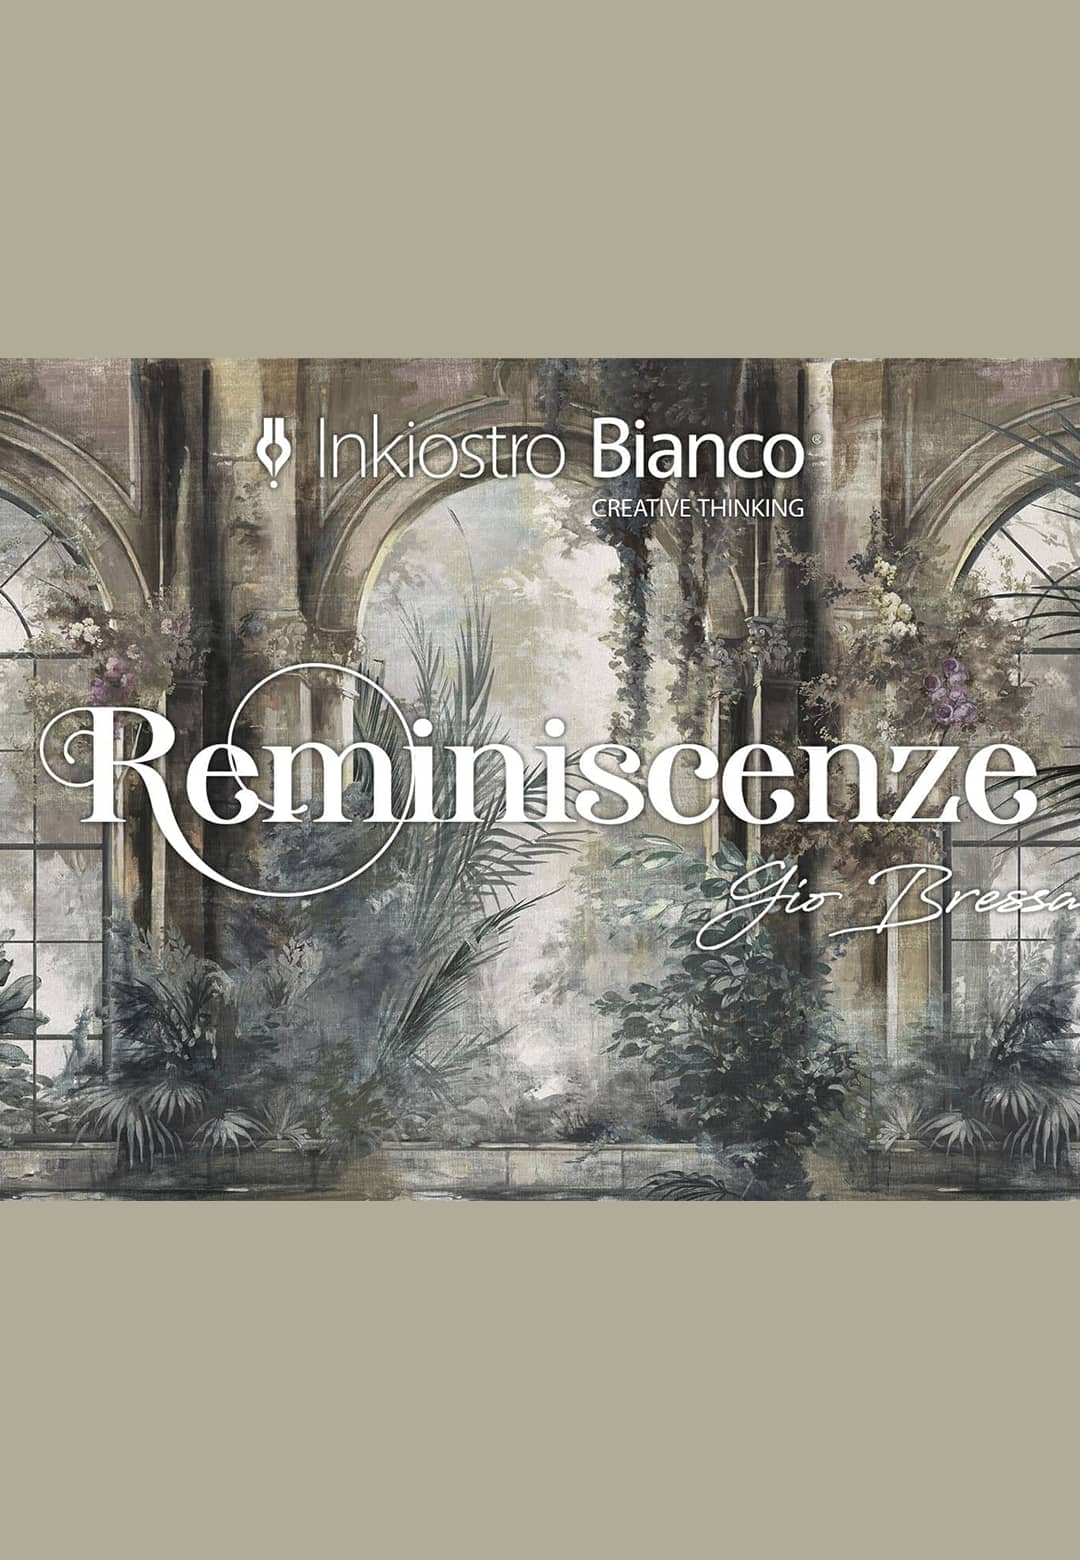 New Special Edition Art Collection by Gio Bressana for Inkiostro Bianco